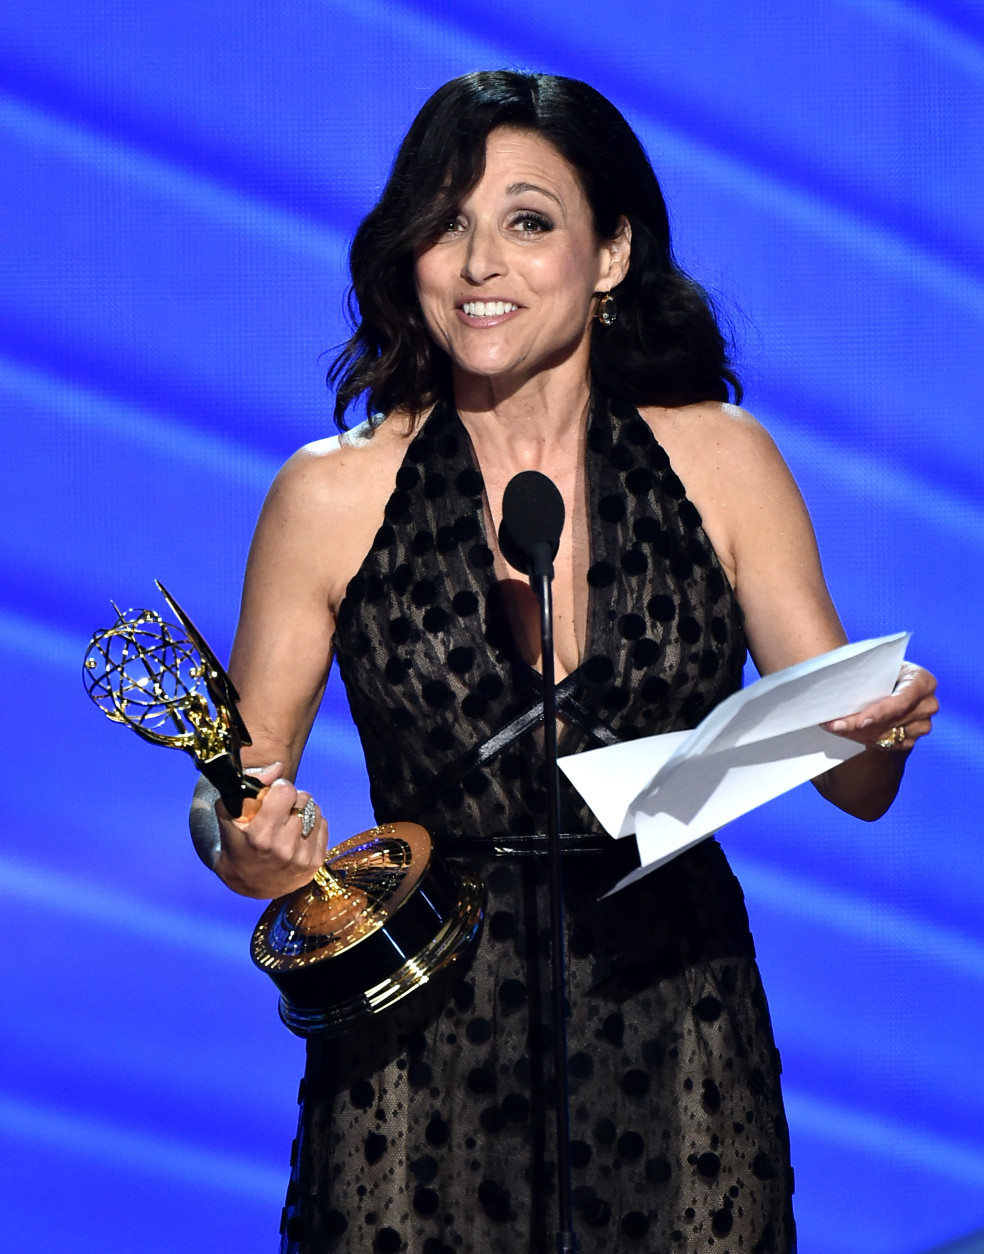 Julia Louis-Dreyfus accepts the award for outstanding lead actress in a comedy series for Veep at the 68th Primetime Emmy Awards on Sunday, Sept. 18, 2016, at the Microsoft Theater in Los Angeles. (Photo by Vince Bucci/Invision for the Television Academy/AP Images)